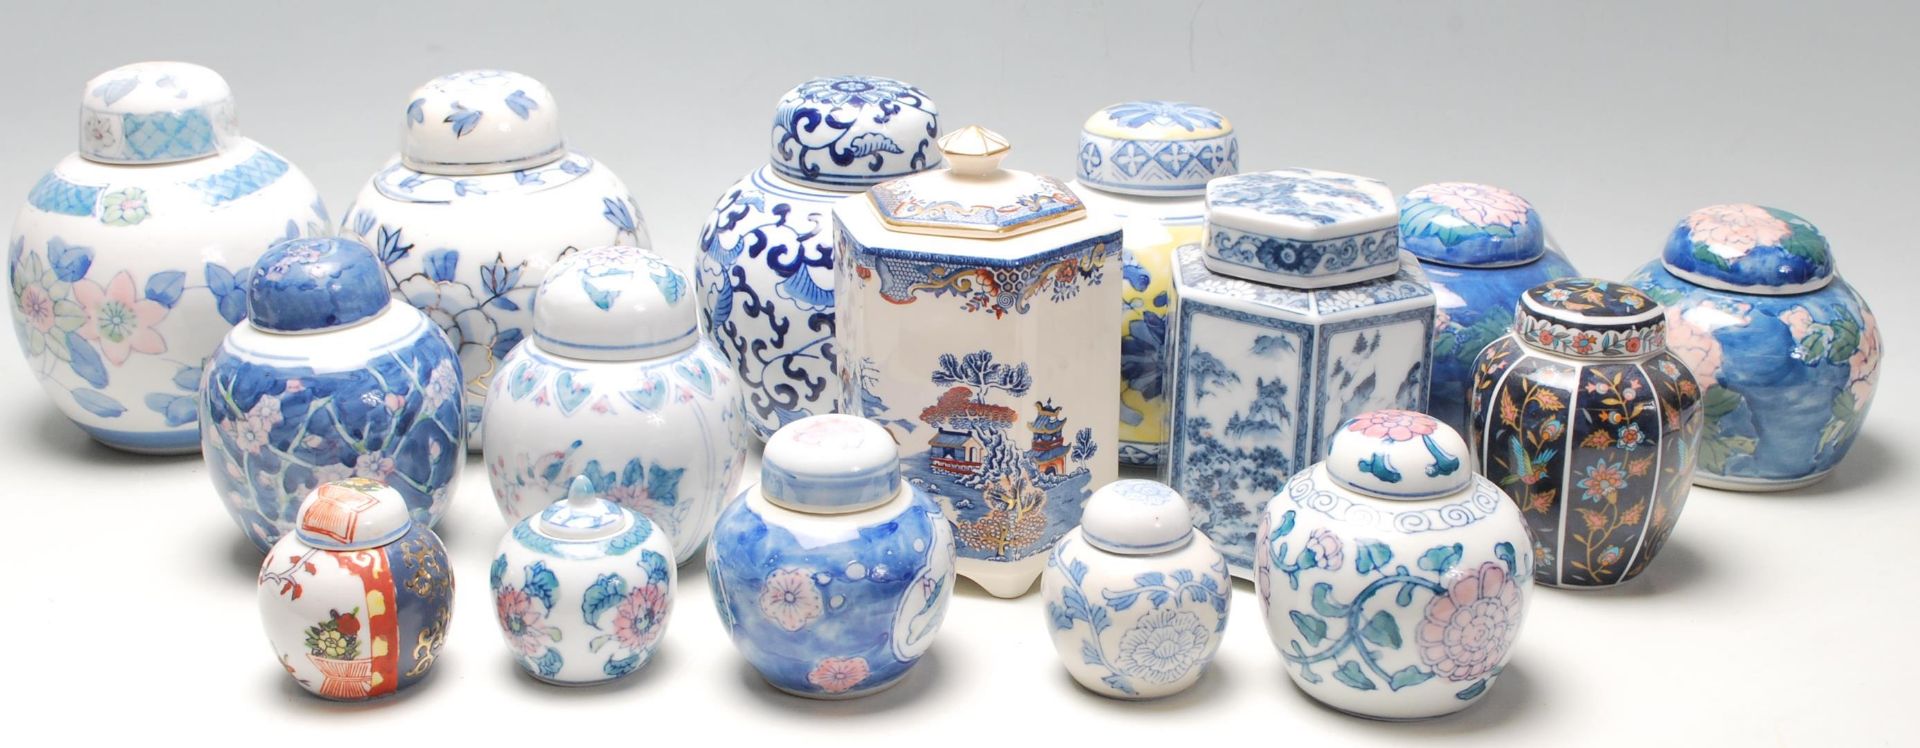 A collection of 20th Century Chinese ginger jars of various styles and forms to include some printed